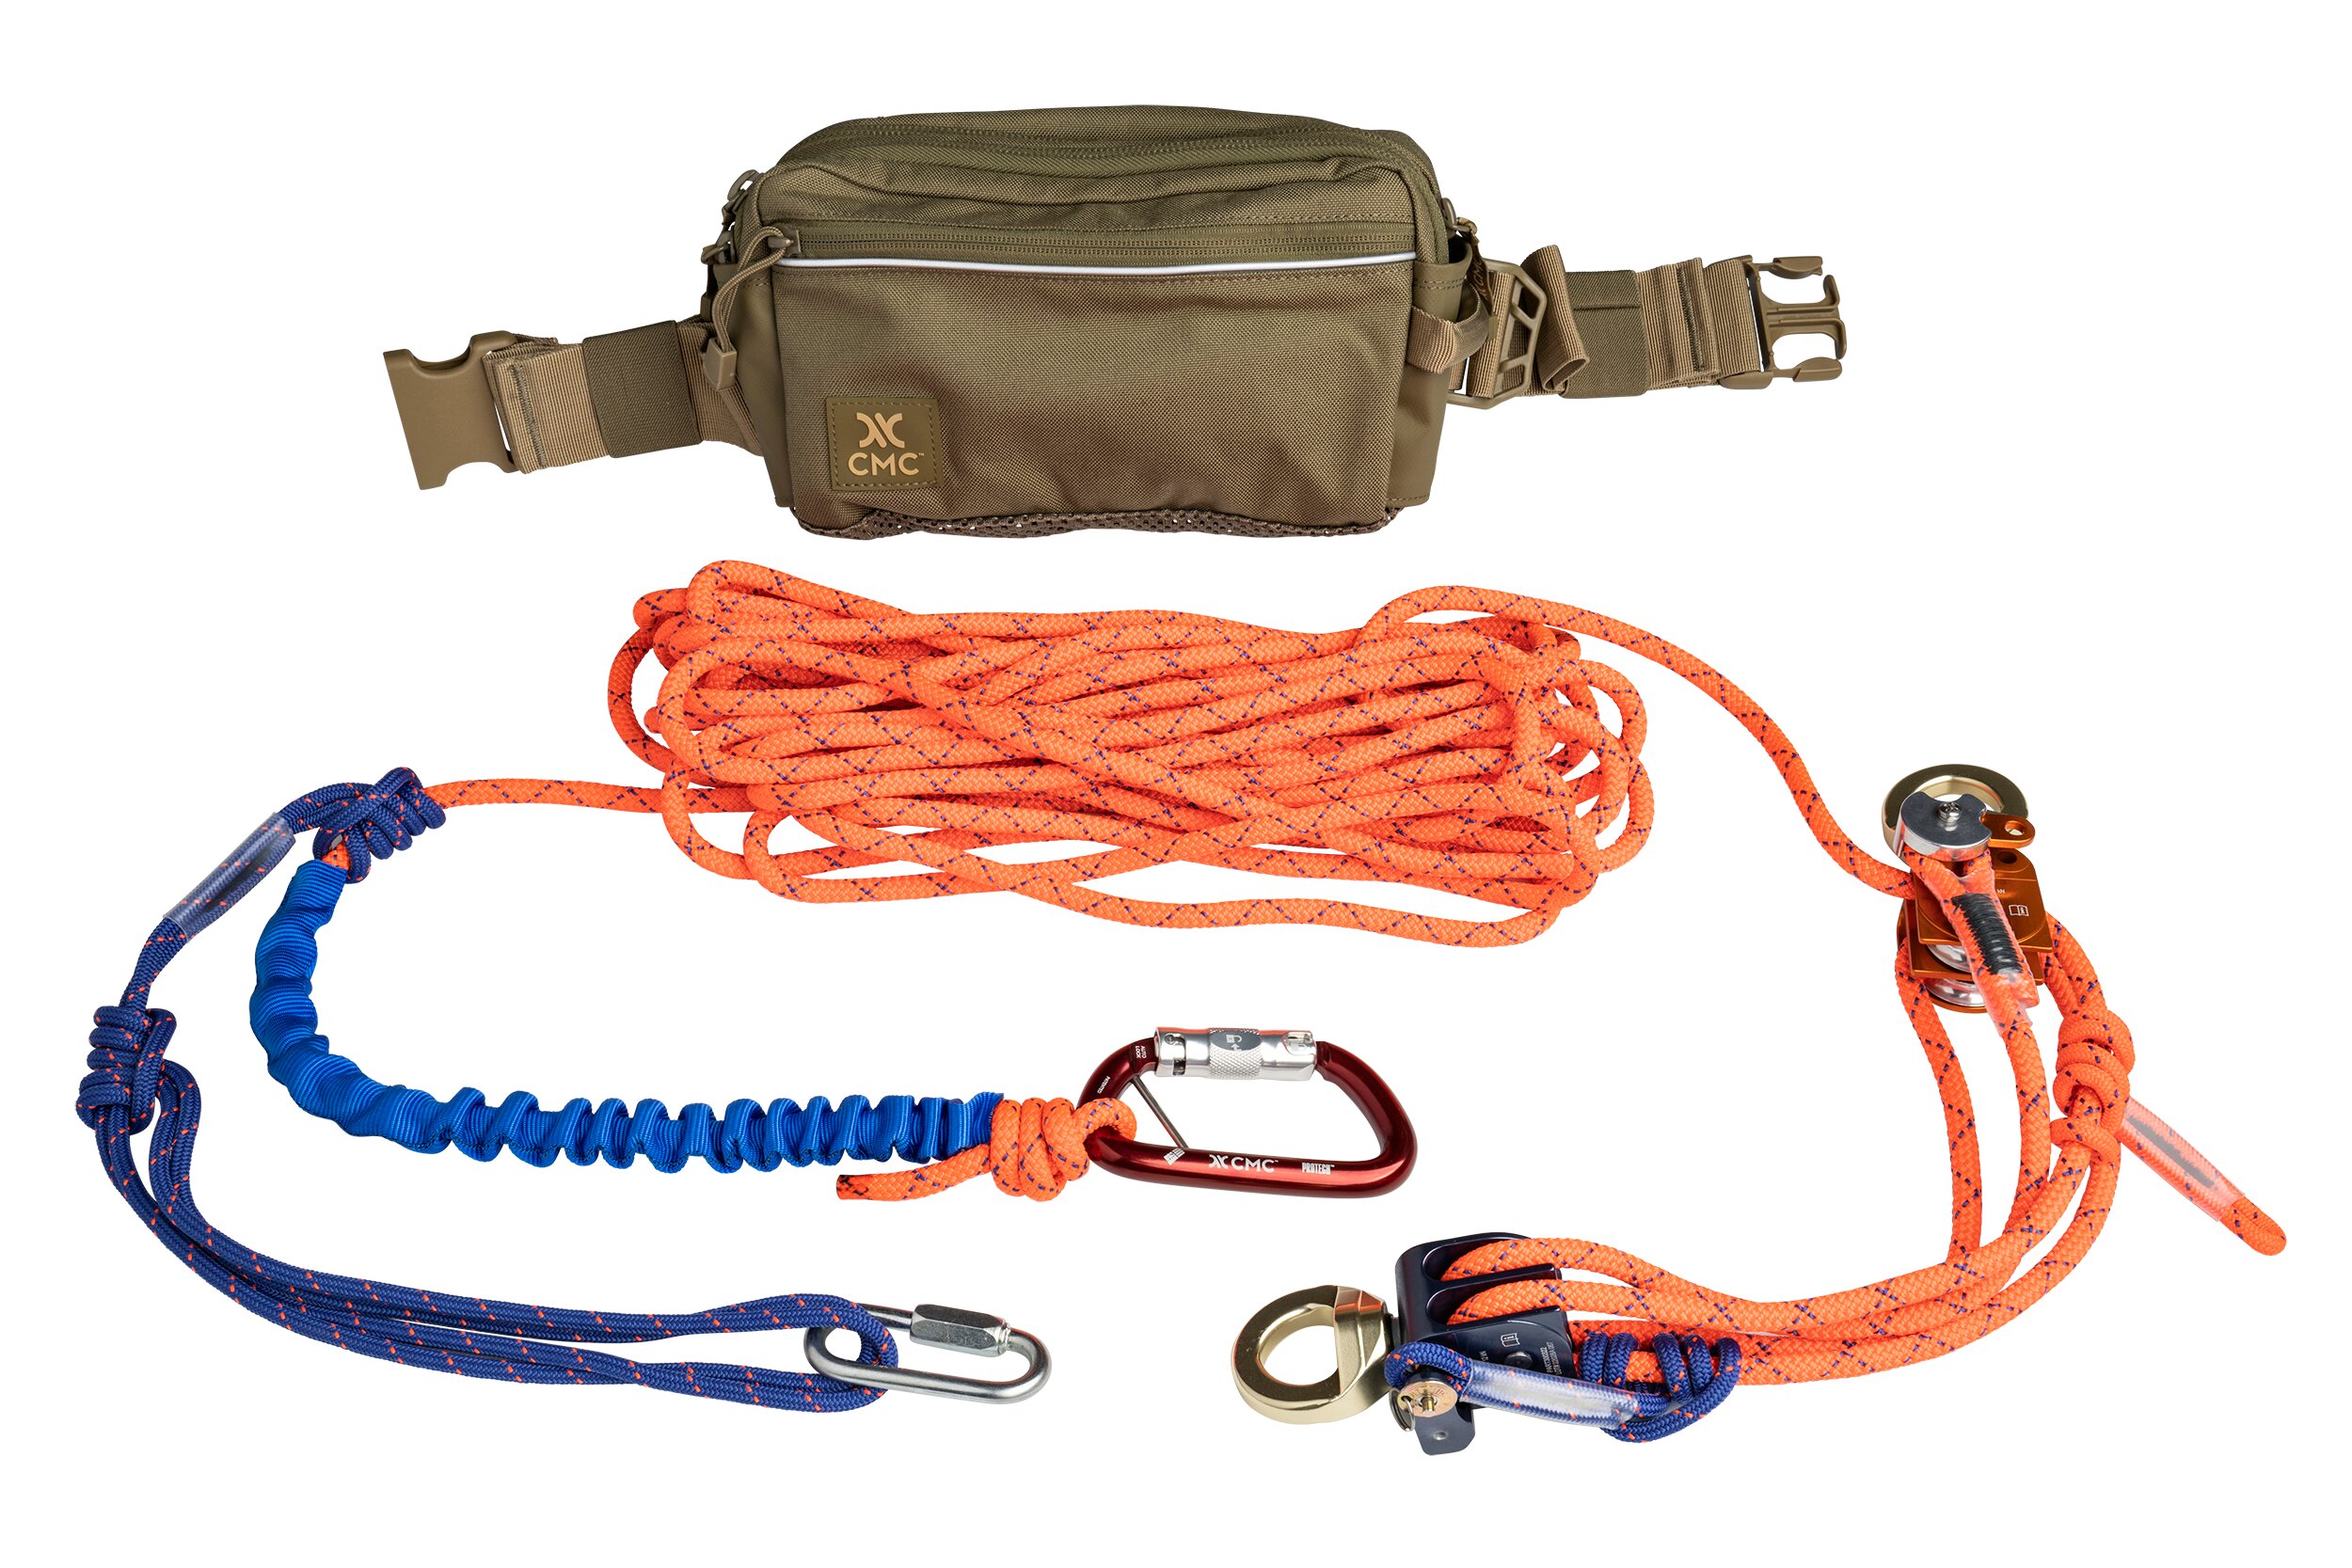 CMC Equipment & Training | Rope Rescue, Access, SAR, Height